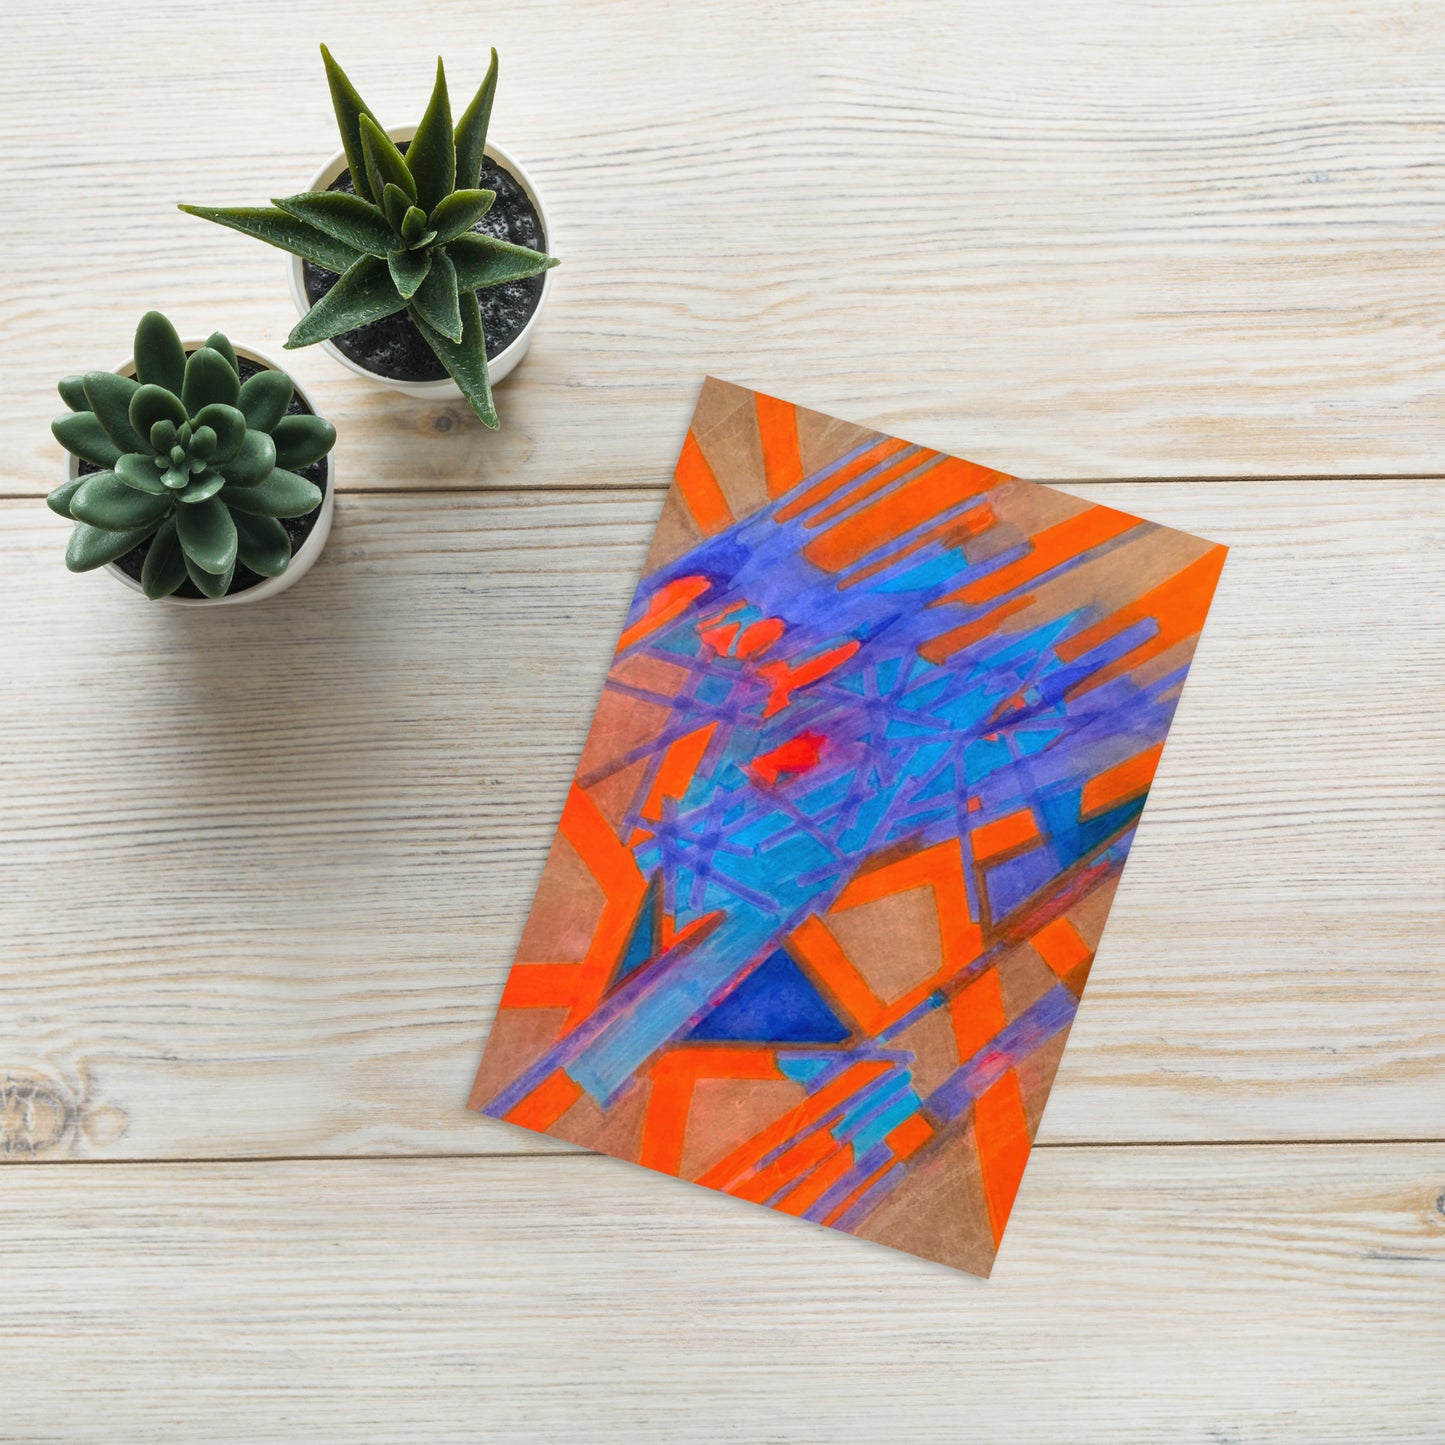 Hot Date Abstract Greeting card - Art Love Decor